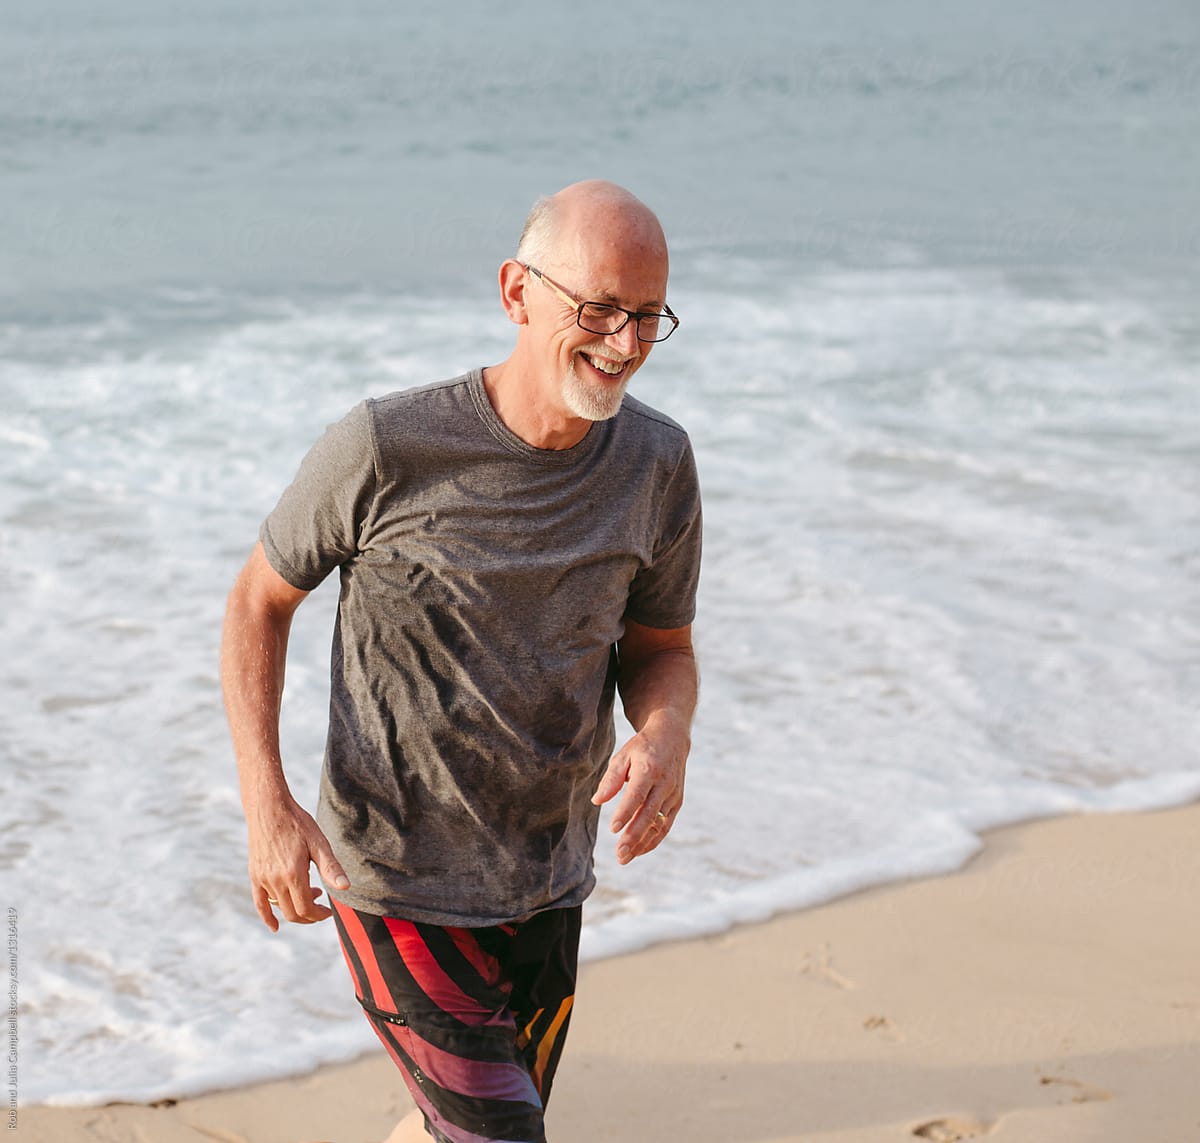 Smiling Middle Aged Man On The Beach At Sunset by Stocksy Contributor Rob  And Julia Campbell - Stocksy